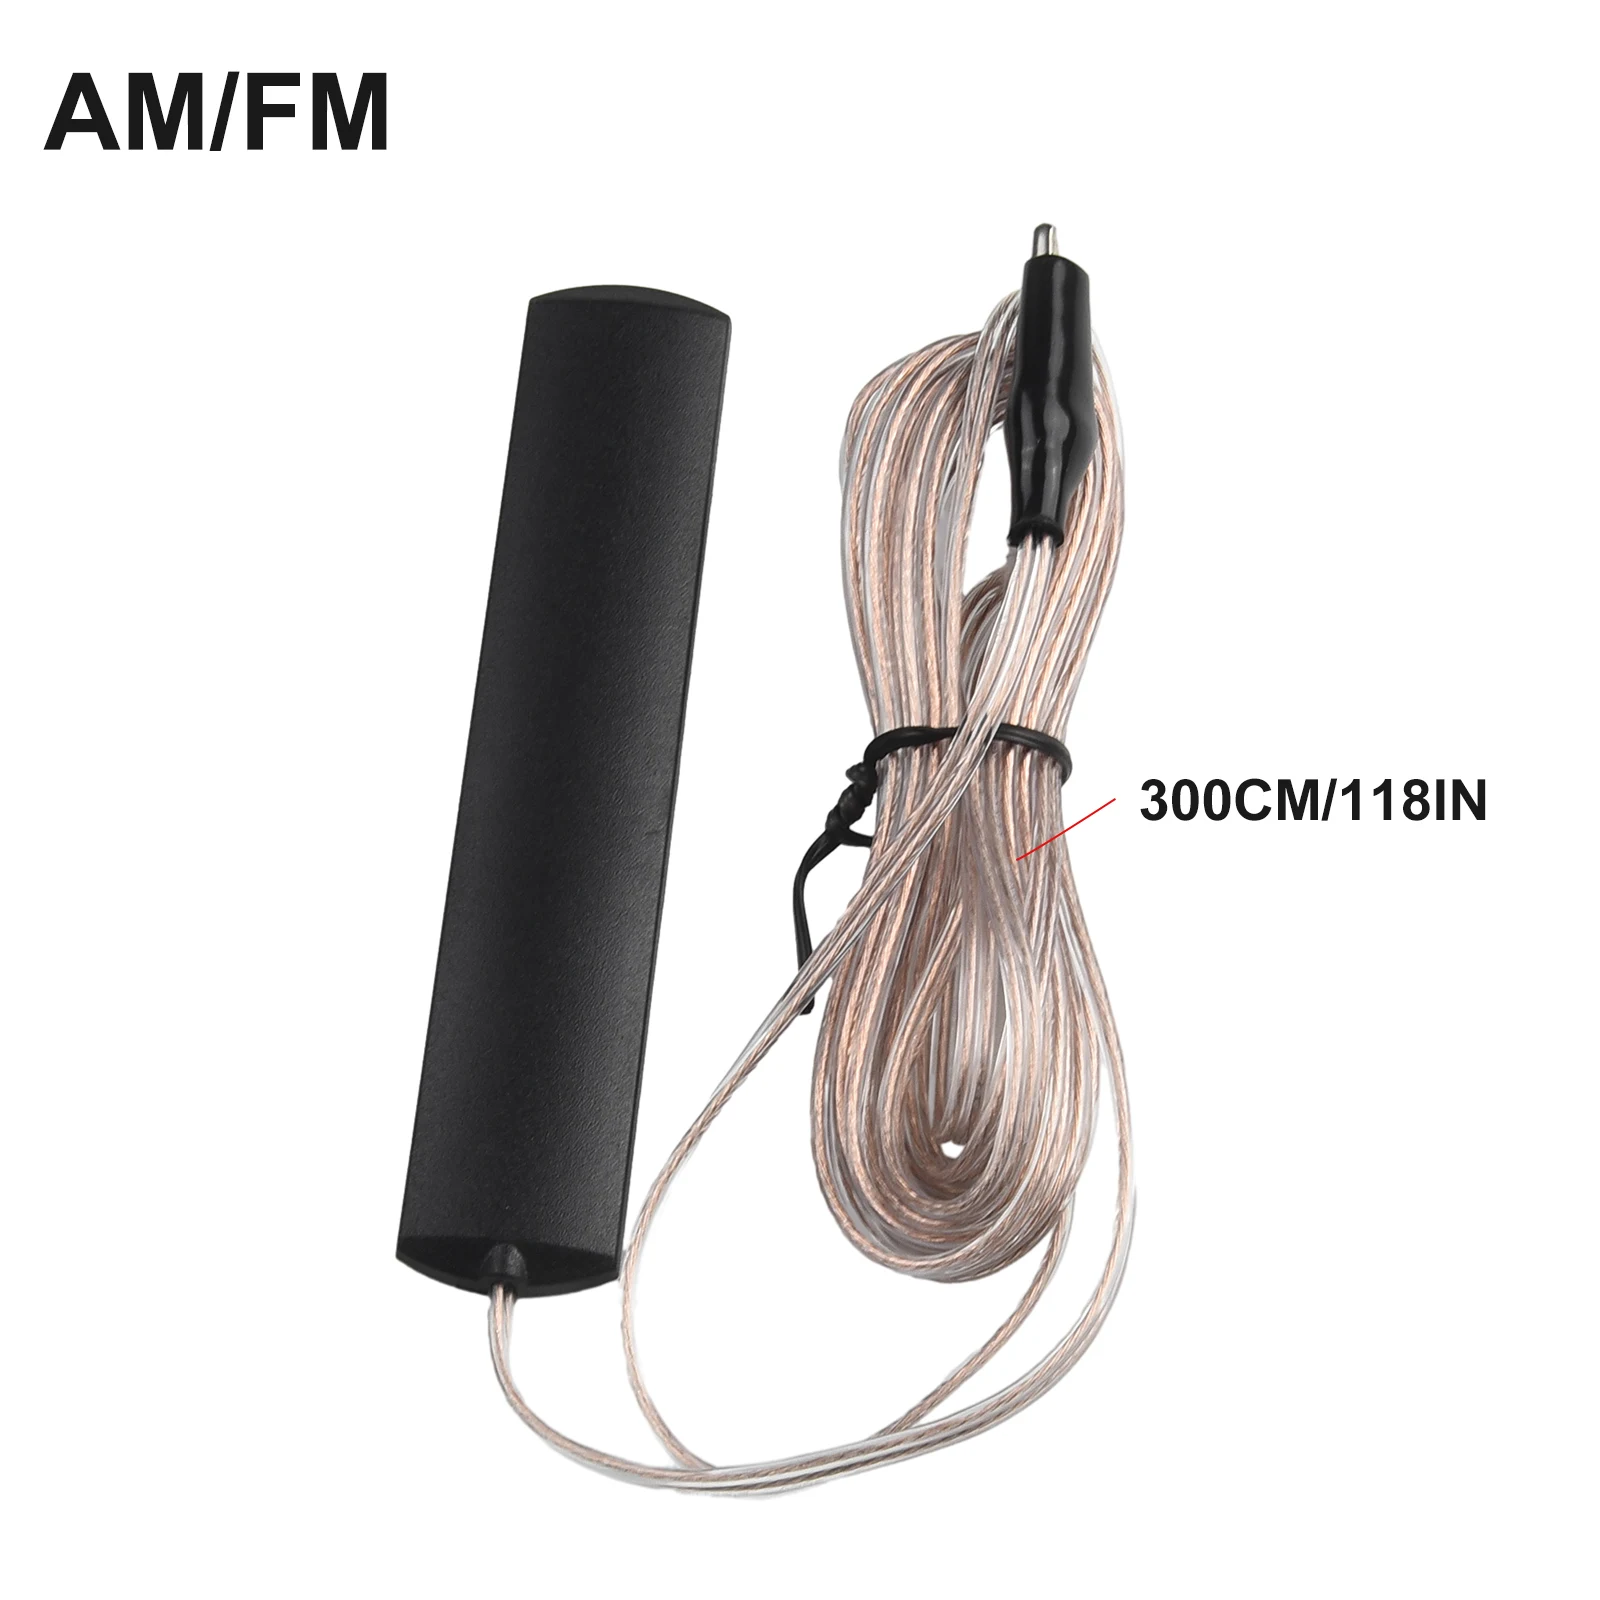 

Clip On Radio FM Stereo Antenna Indoor Length 5m Signal Enhance Wide Compatible 3.2m Cable Alligator Connector